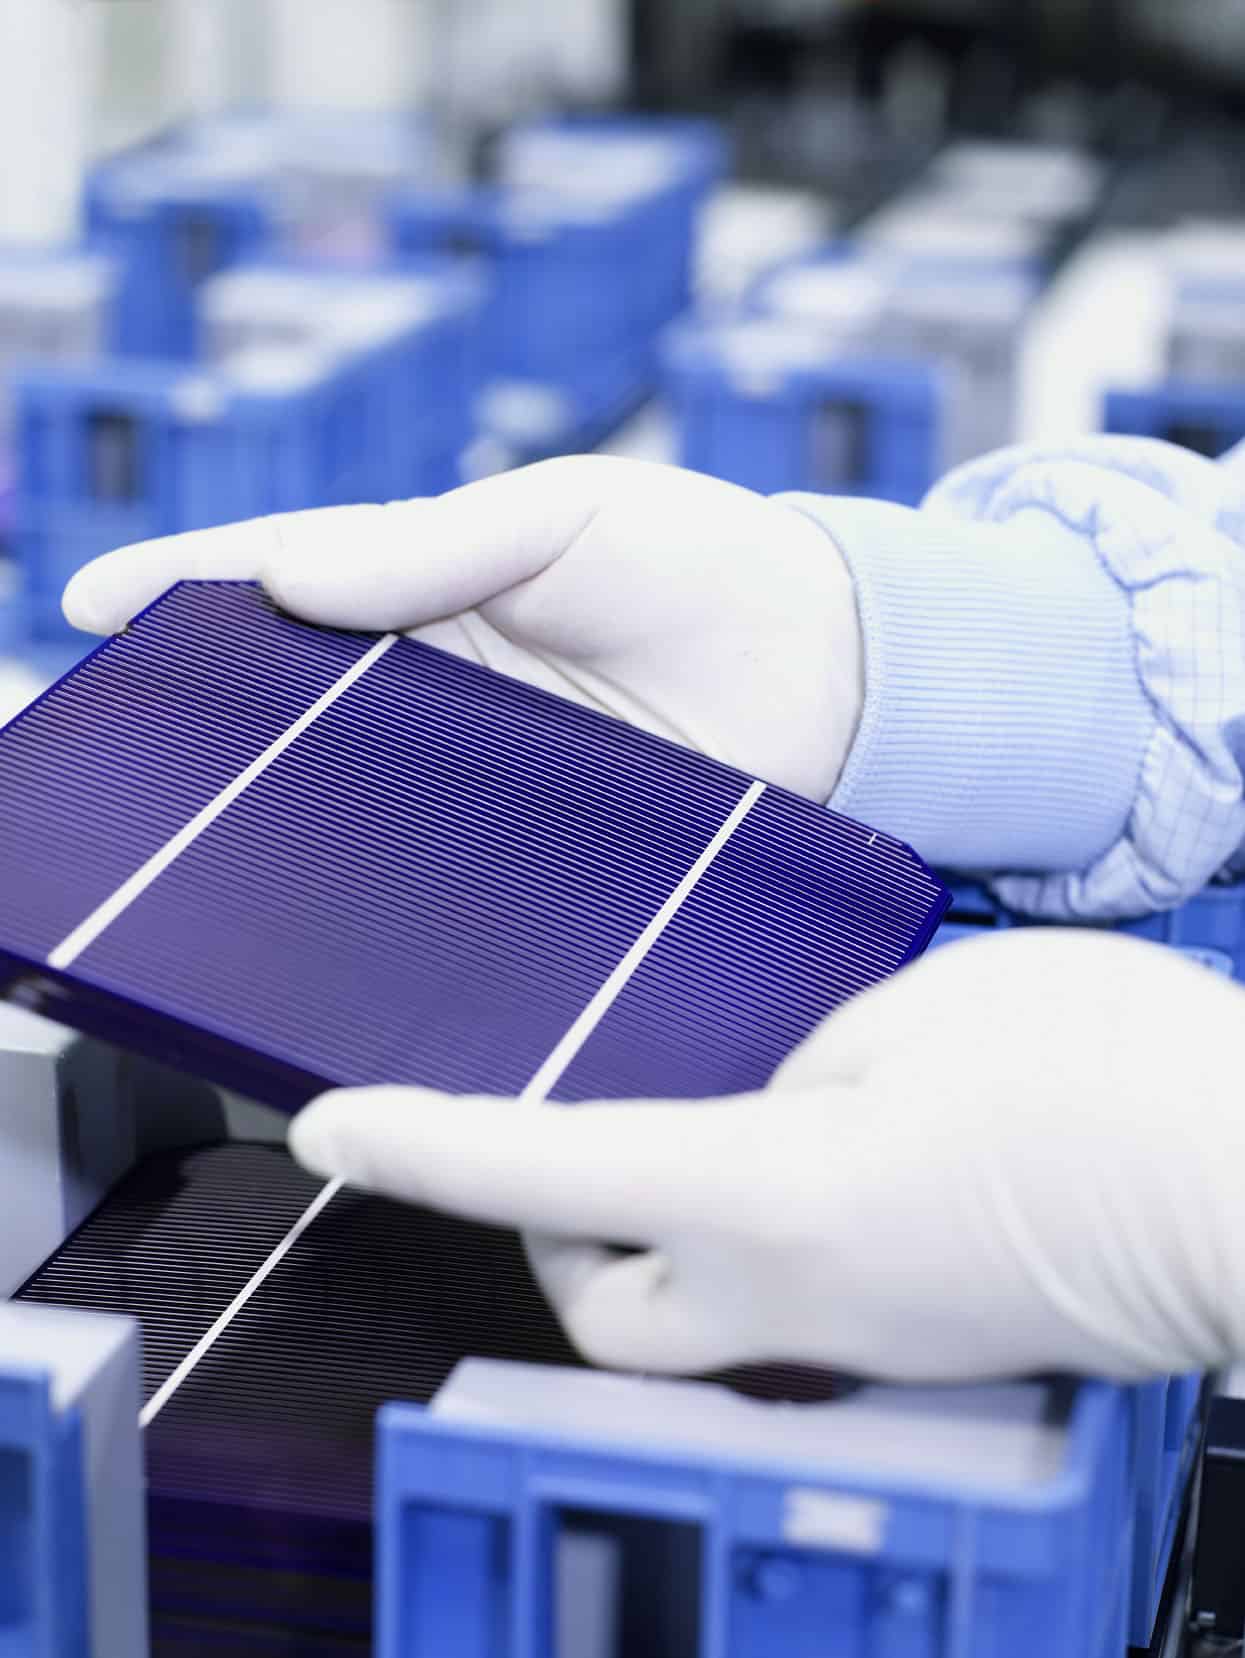 Two hands carrying a solar cell